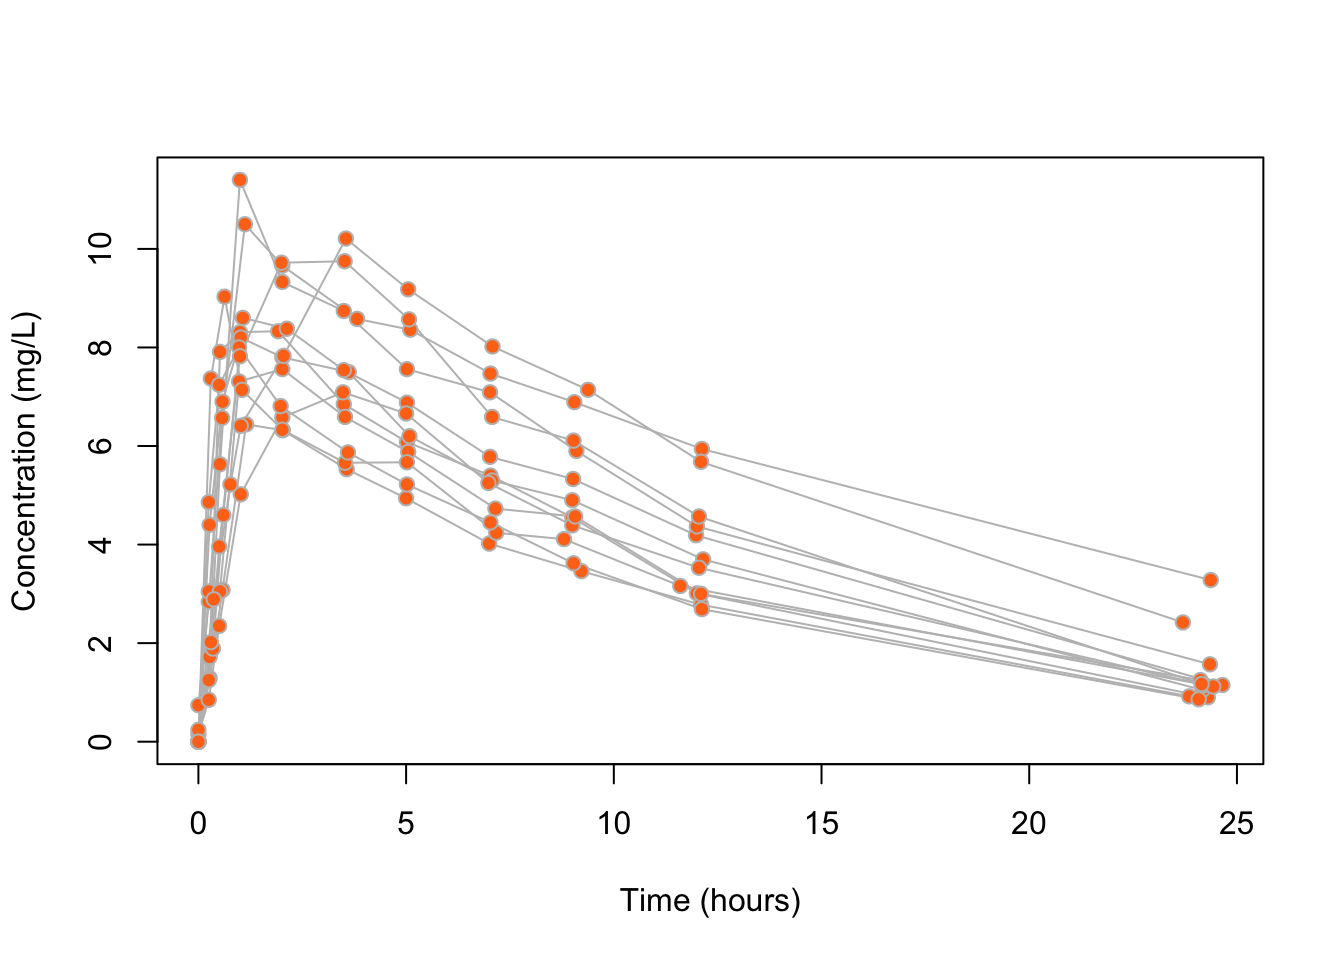 Concentration of theophylline against time for each of the individuals in the study.